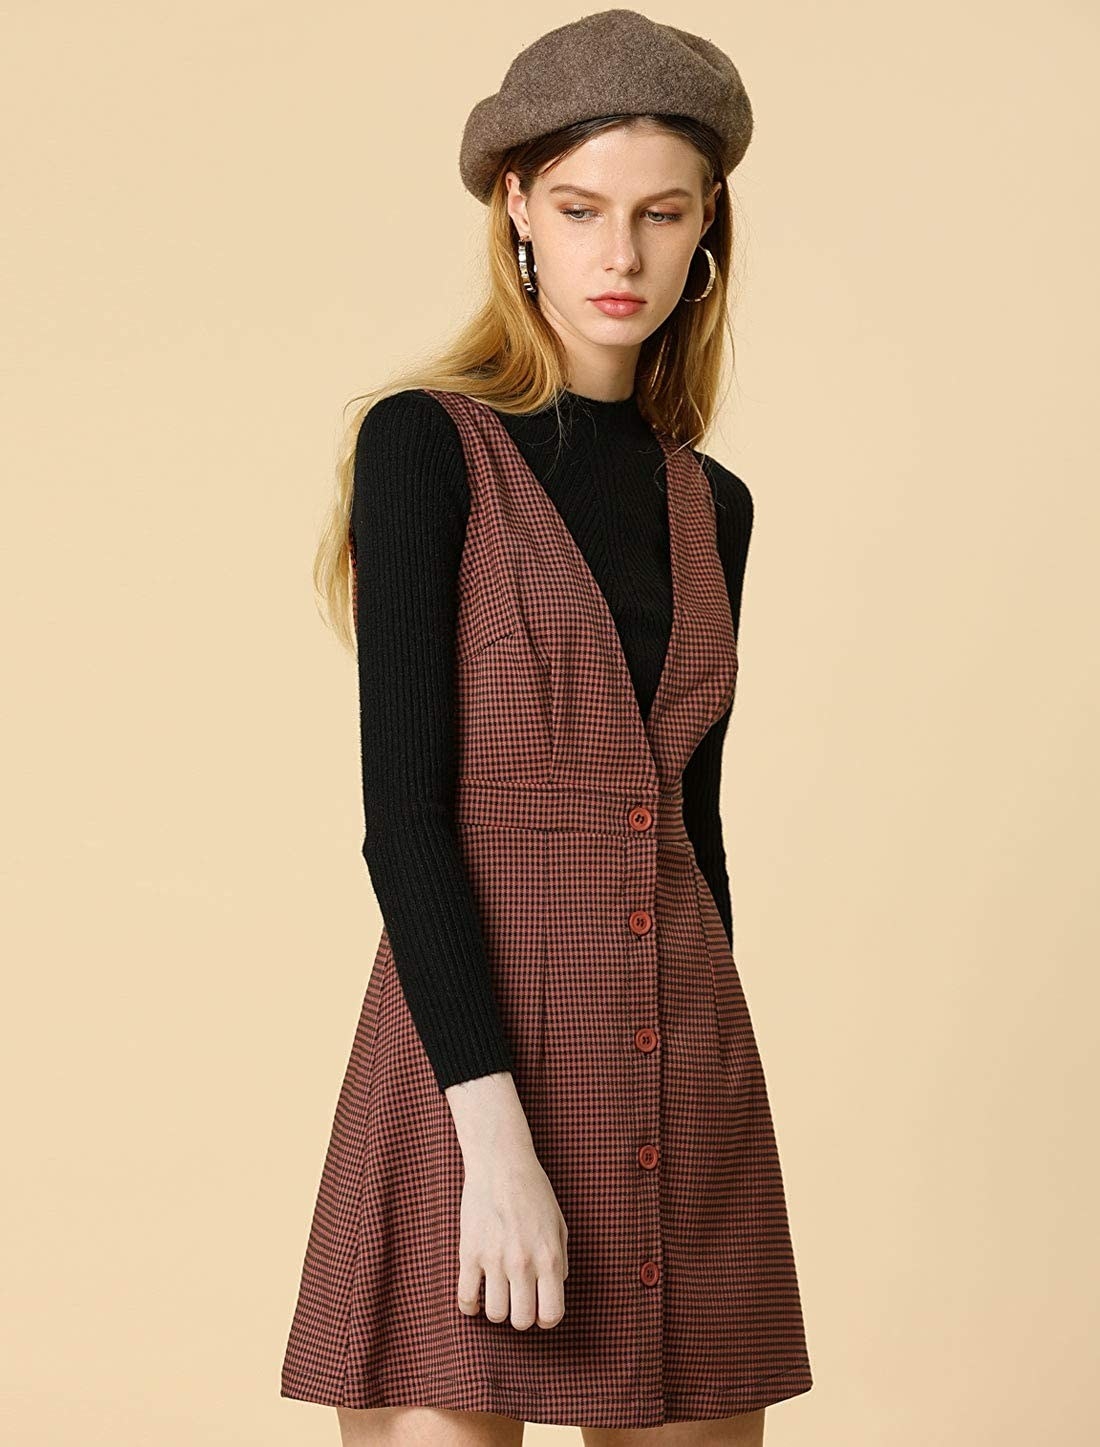 A model in the burgundy dress with v-neck and buttons down the front over a black sweater